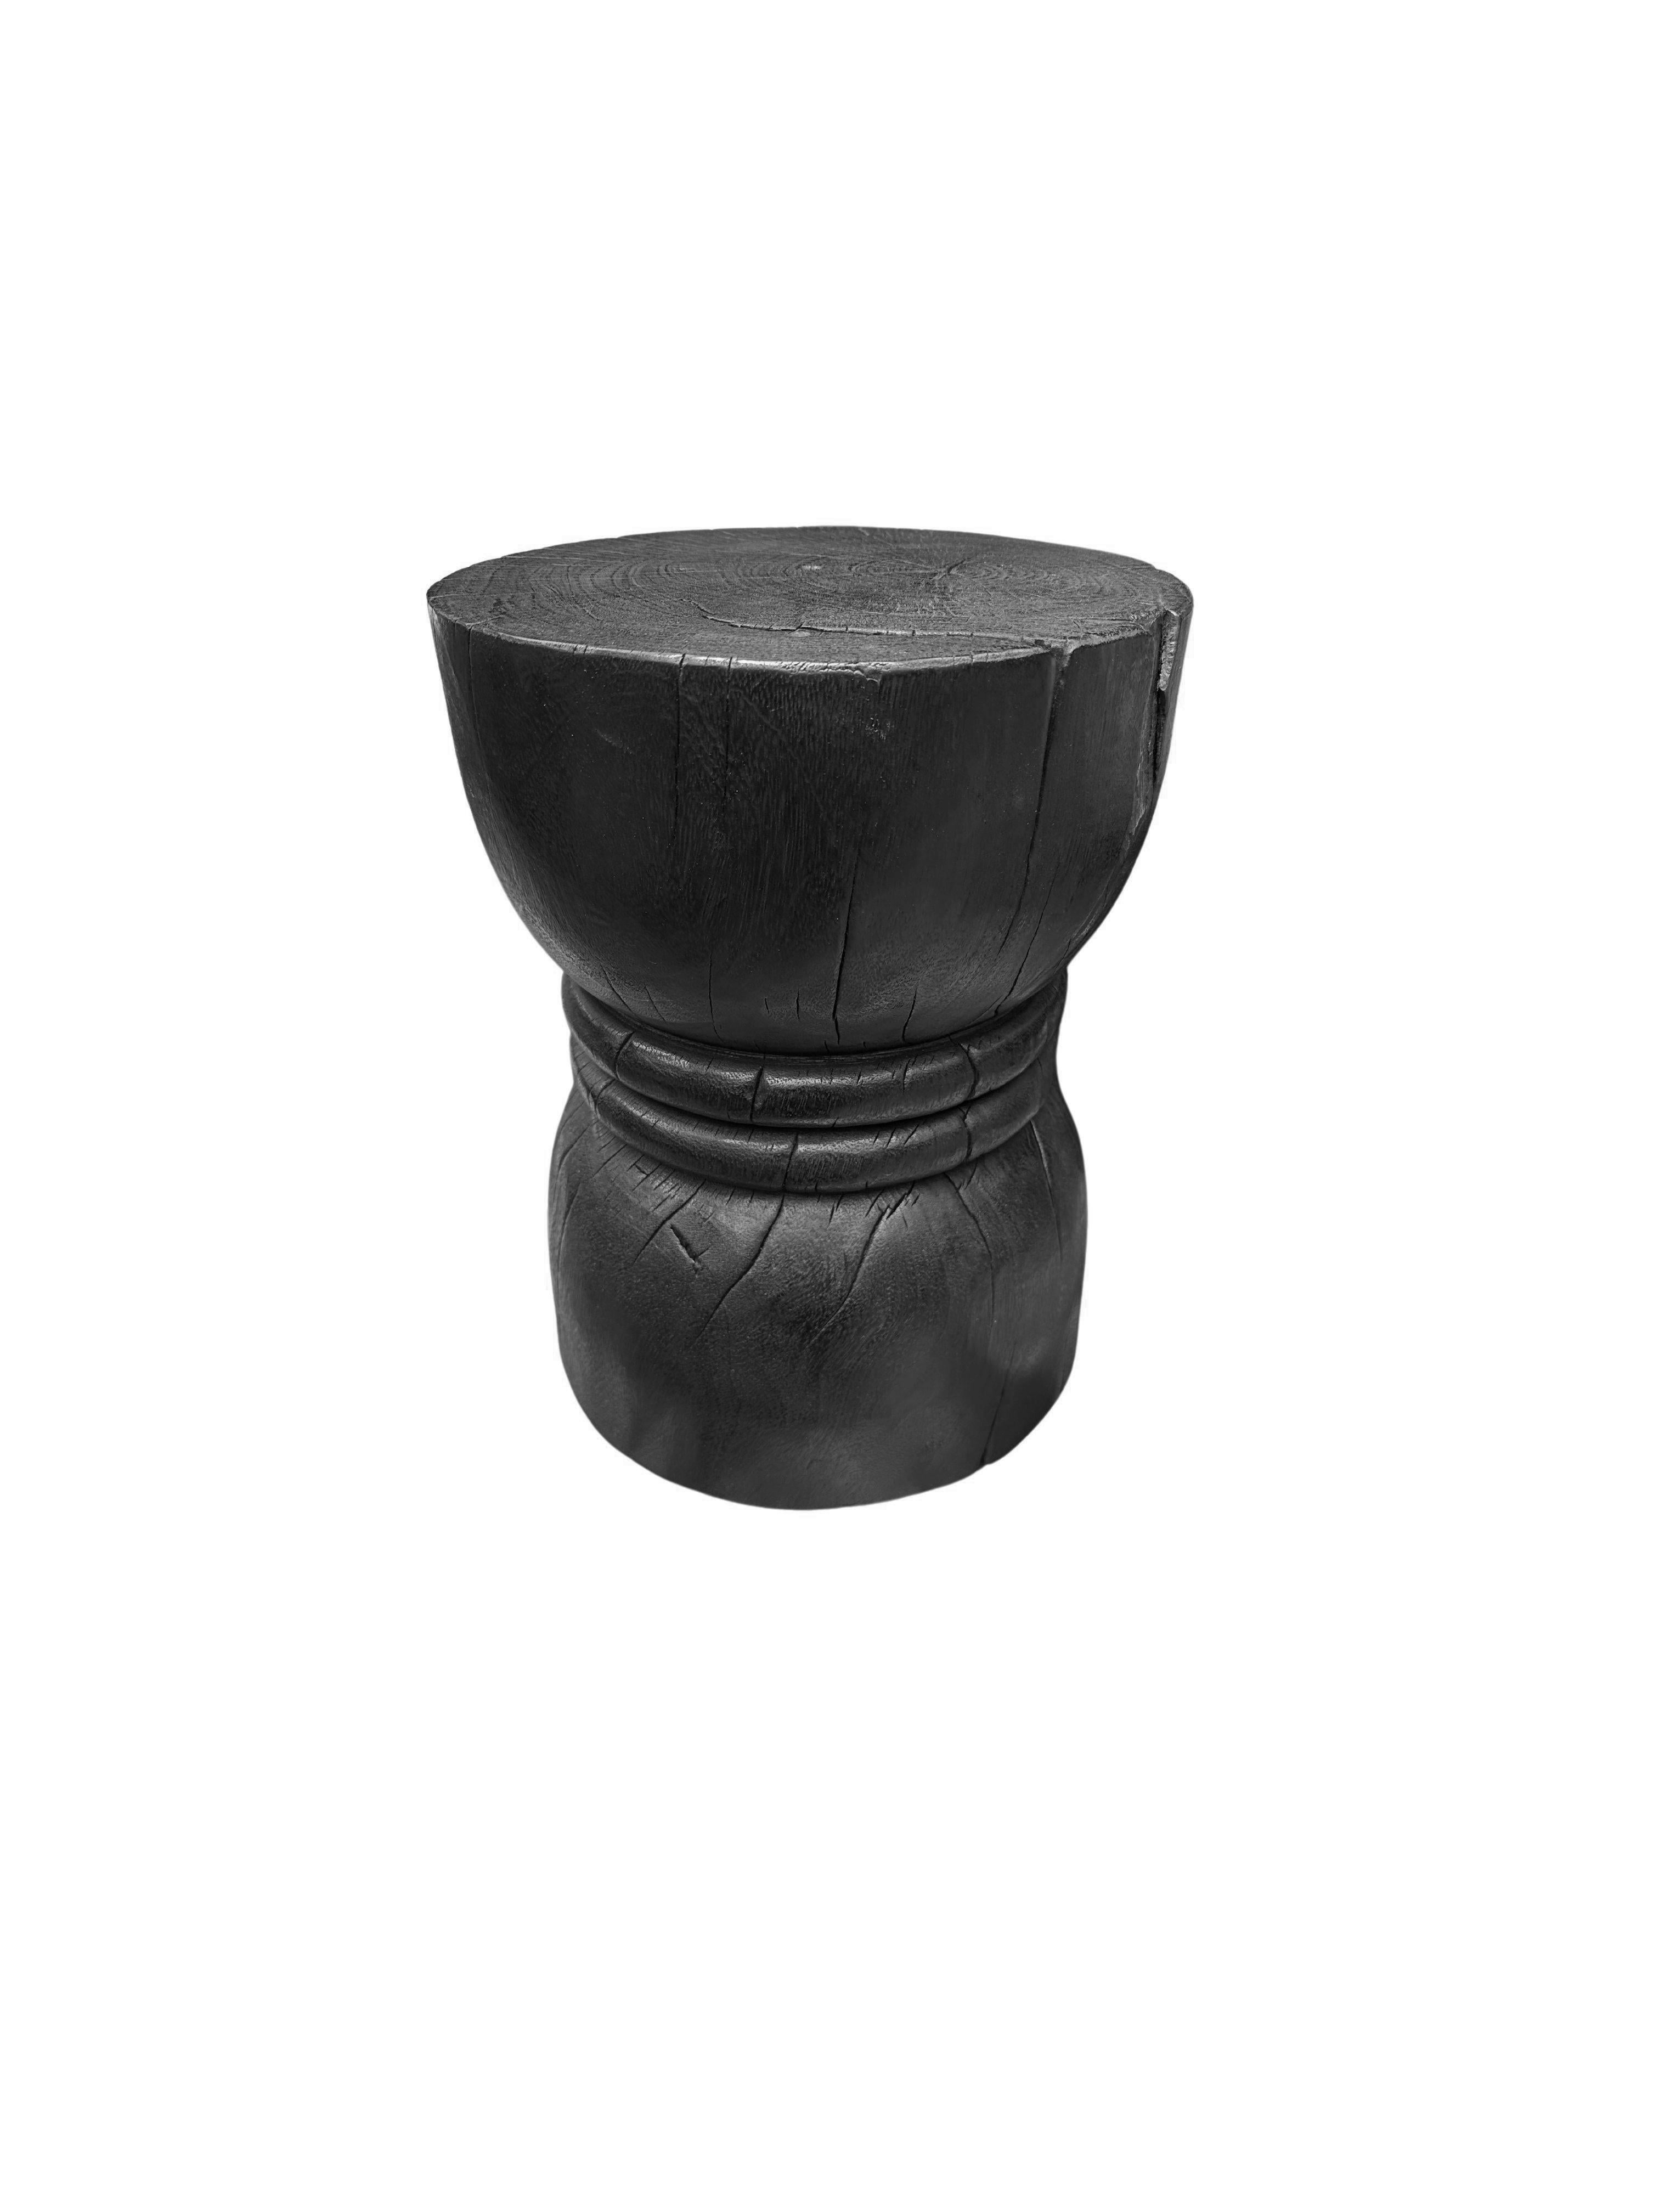 This wonderfully sculptural round side table features a burnt finish, providing a stark black tone to the wood. The exterior was burnt numerous times and finished with a clear coat. The table's neutral pigment makes it perfect for any space. It was